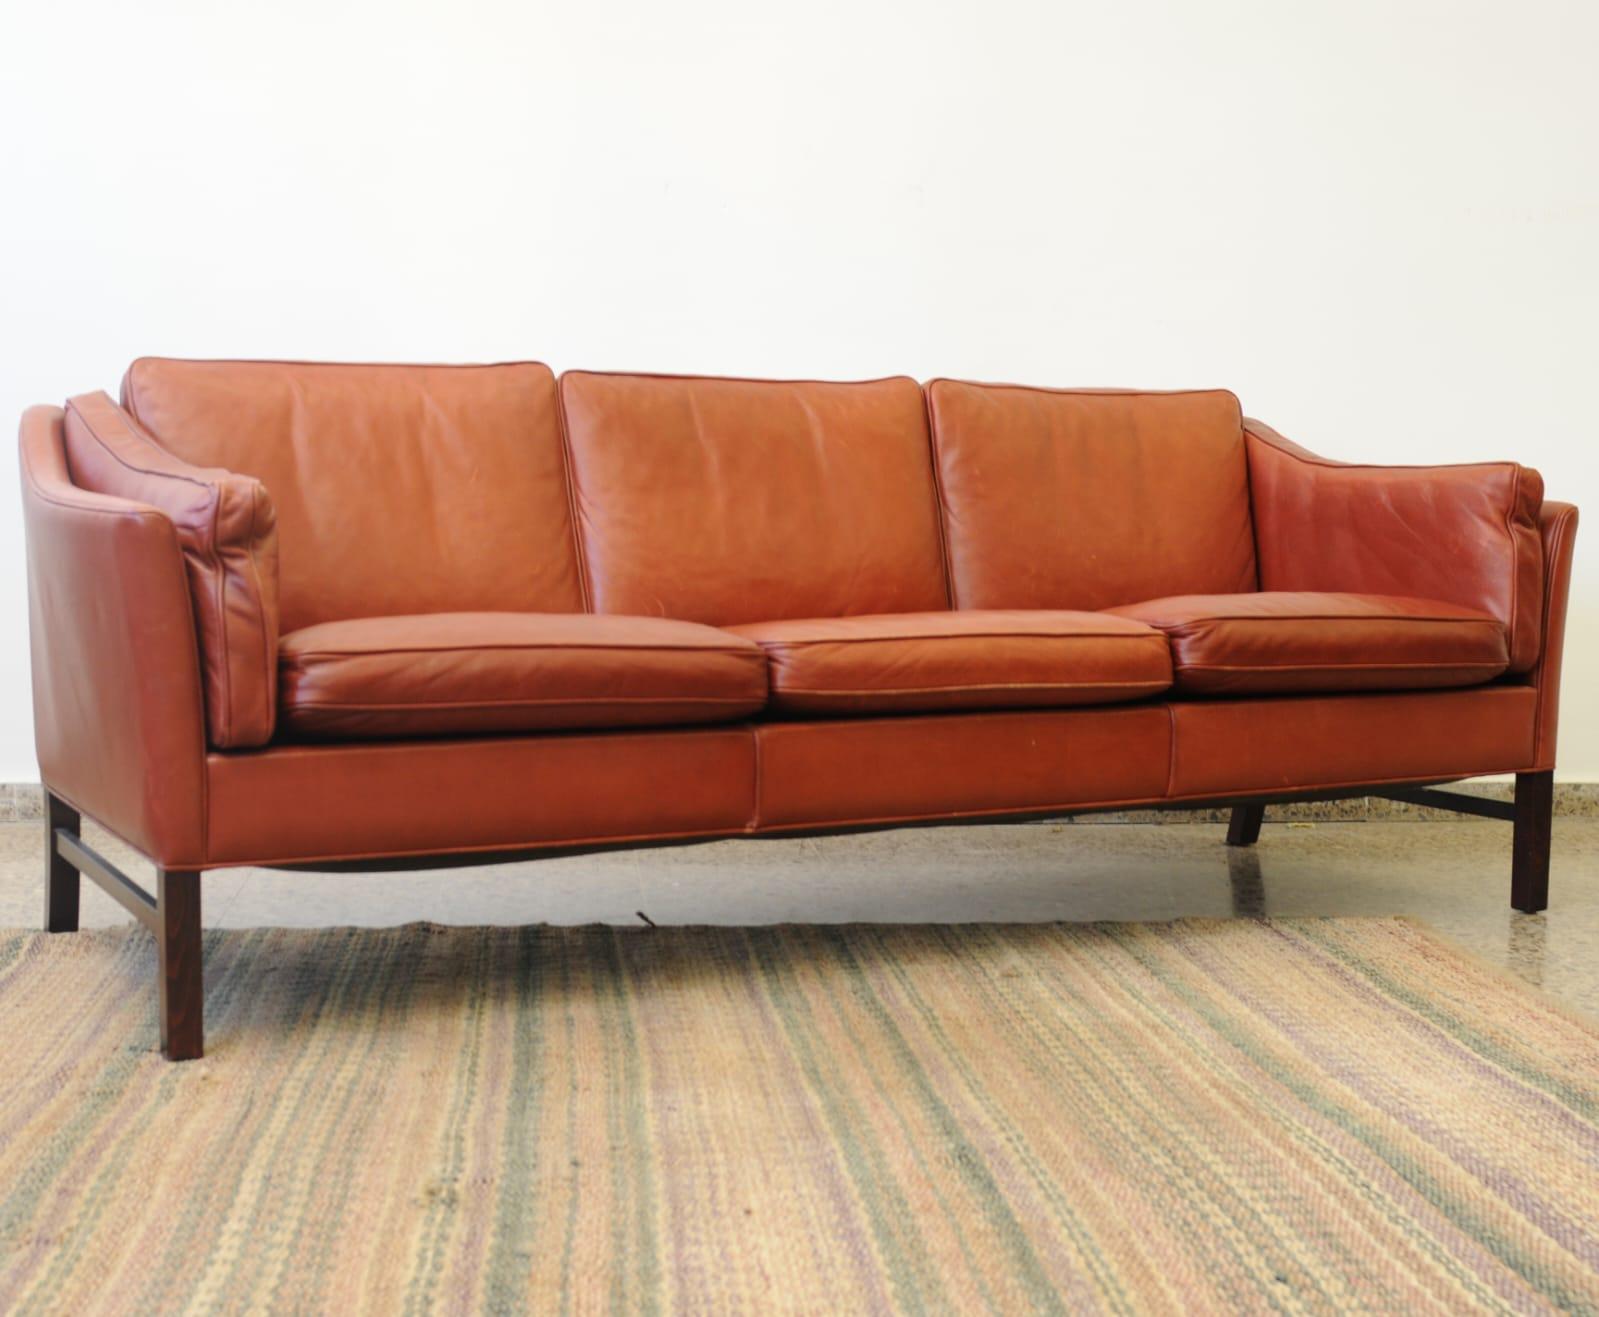 Vintage Three-seater EVA model Buffalo leather sofa, design by Stouby Polster Møbelfabrik from Denmark circa mid 1960s. 

The structure is in solid beech wood, joined by a strong leather support, with padded foam cushions in Buffalo leather